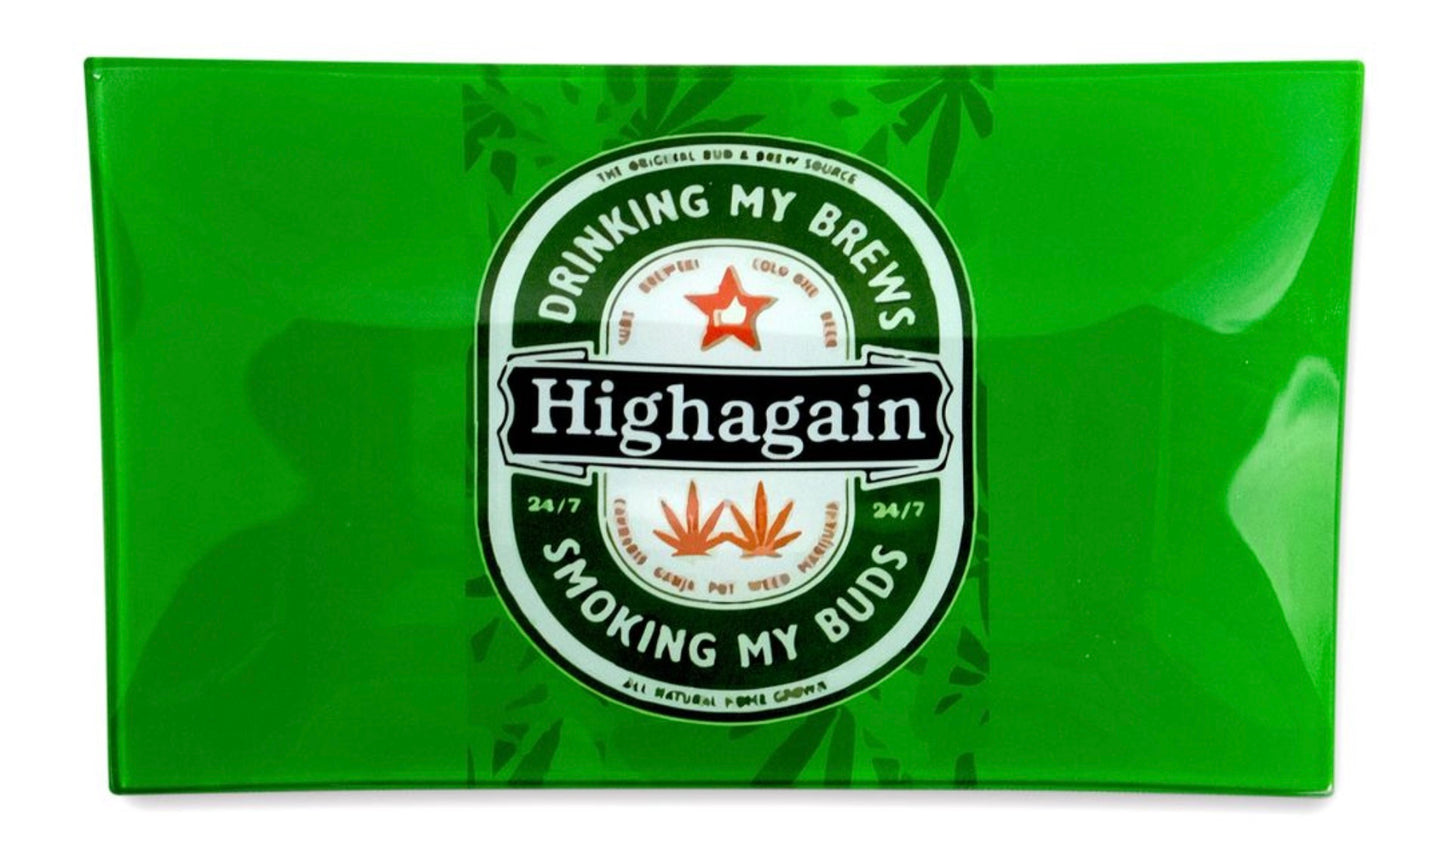 Kandy Smoke “Highagain” Glass Rolling Tray yoga smokes yoga studio, delivery, delivery near me, yoga smokes smoke shop, find smoke shop, head shop near me, yoga studio, headshop, head shop, local smoke shop, psl, psl smoke shop, smoke shop, smokeshop, yoga, yoga studio, dispensary, local dispensary, smokeshop near me, port saint lucie, florida, port st lucie, lounge, life, highlife, love, stoned, highsociety. Yoga Smokes